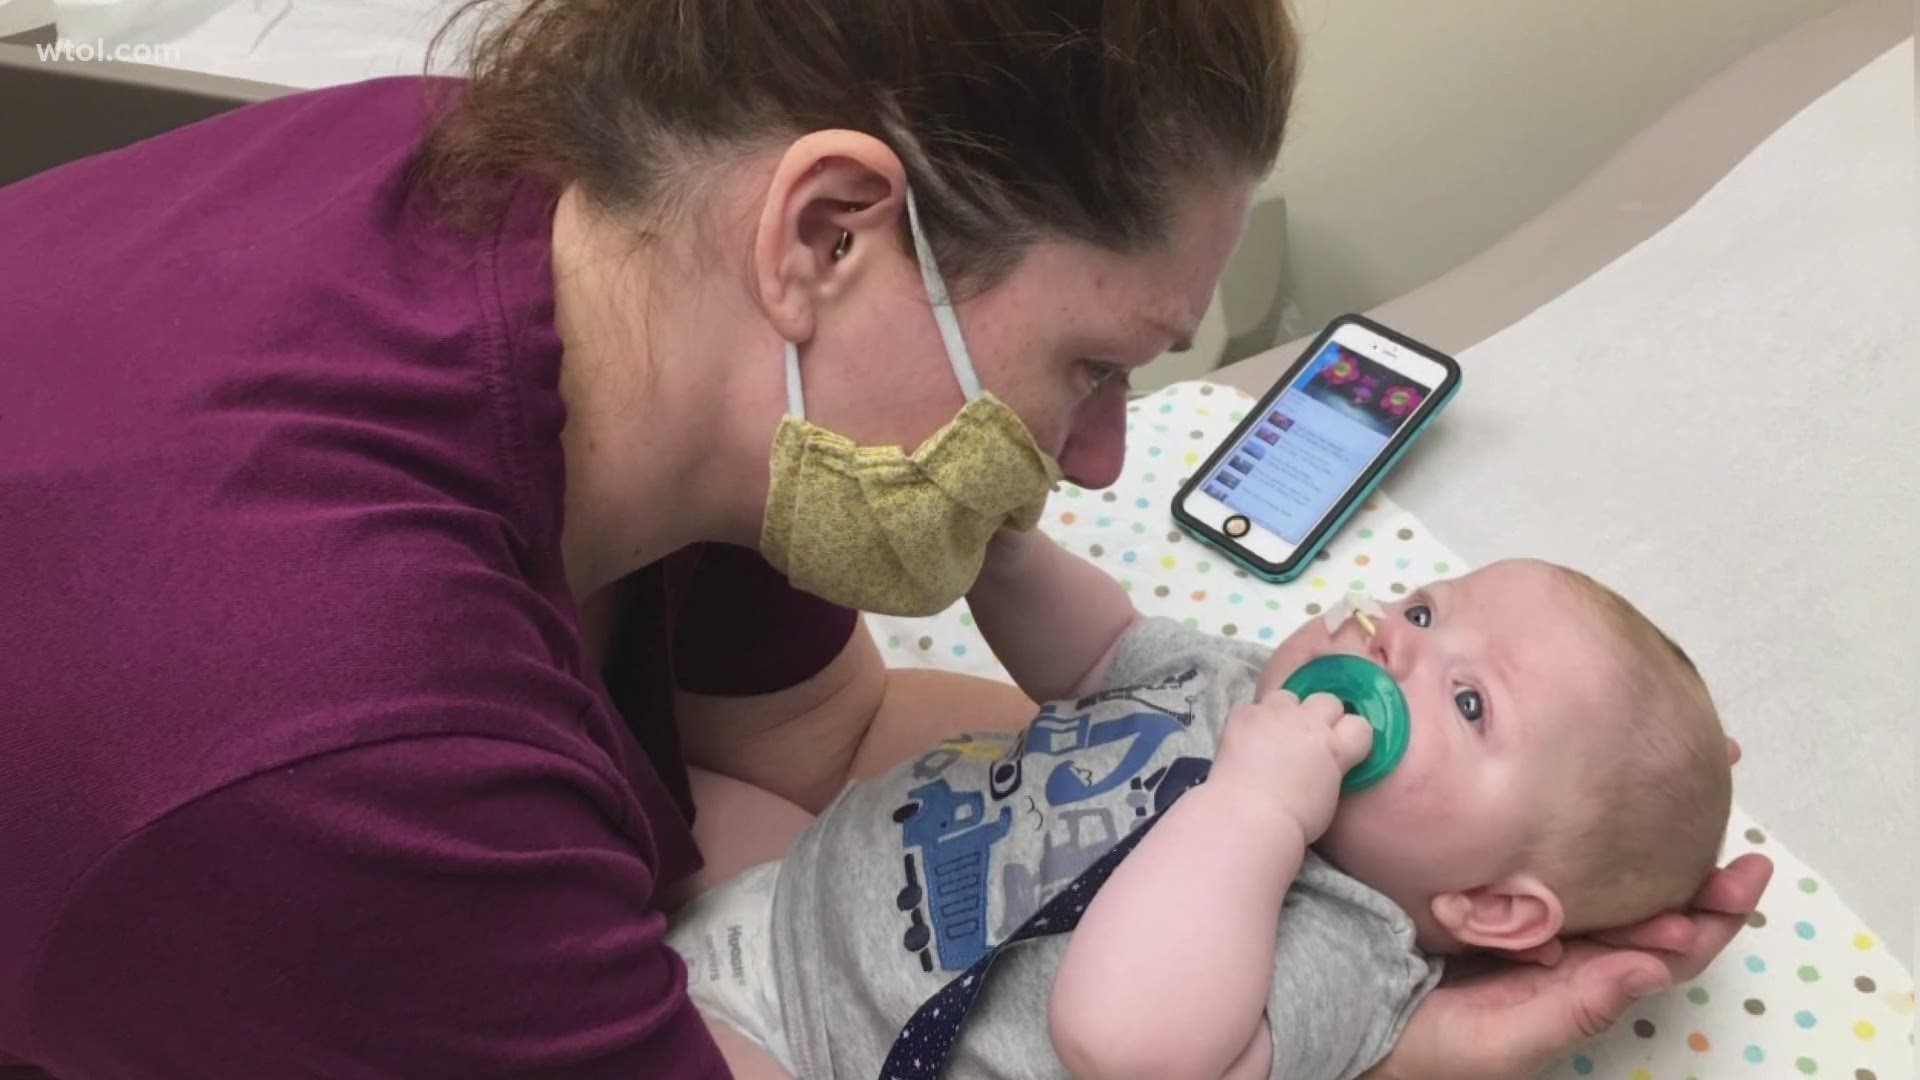 Dean has been able to celebrate Christmas and see a new year. Now, he’s turning one, right before Valentine’s Day - and it's all thanks to the gift of a new heart.